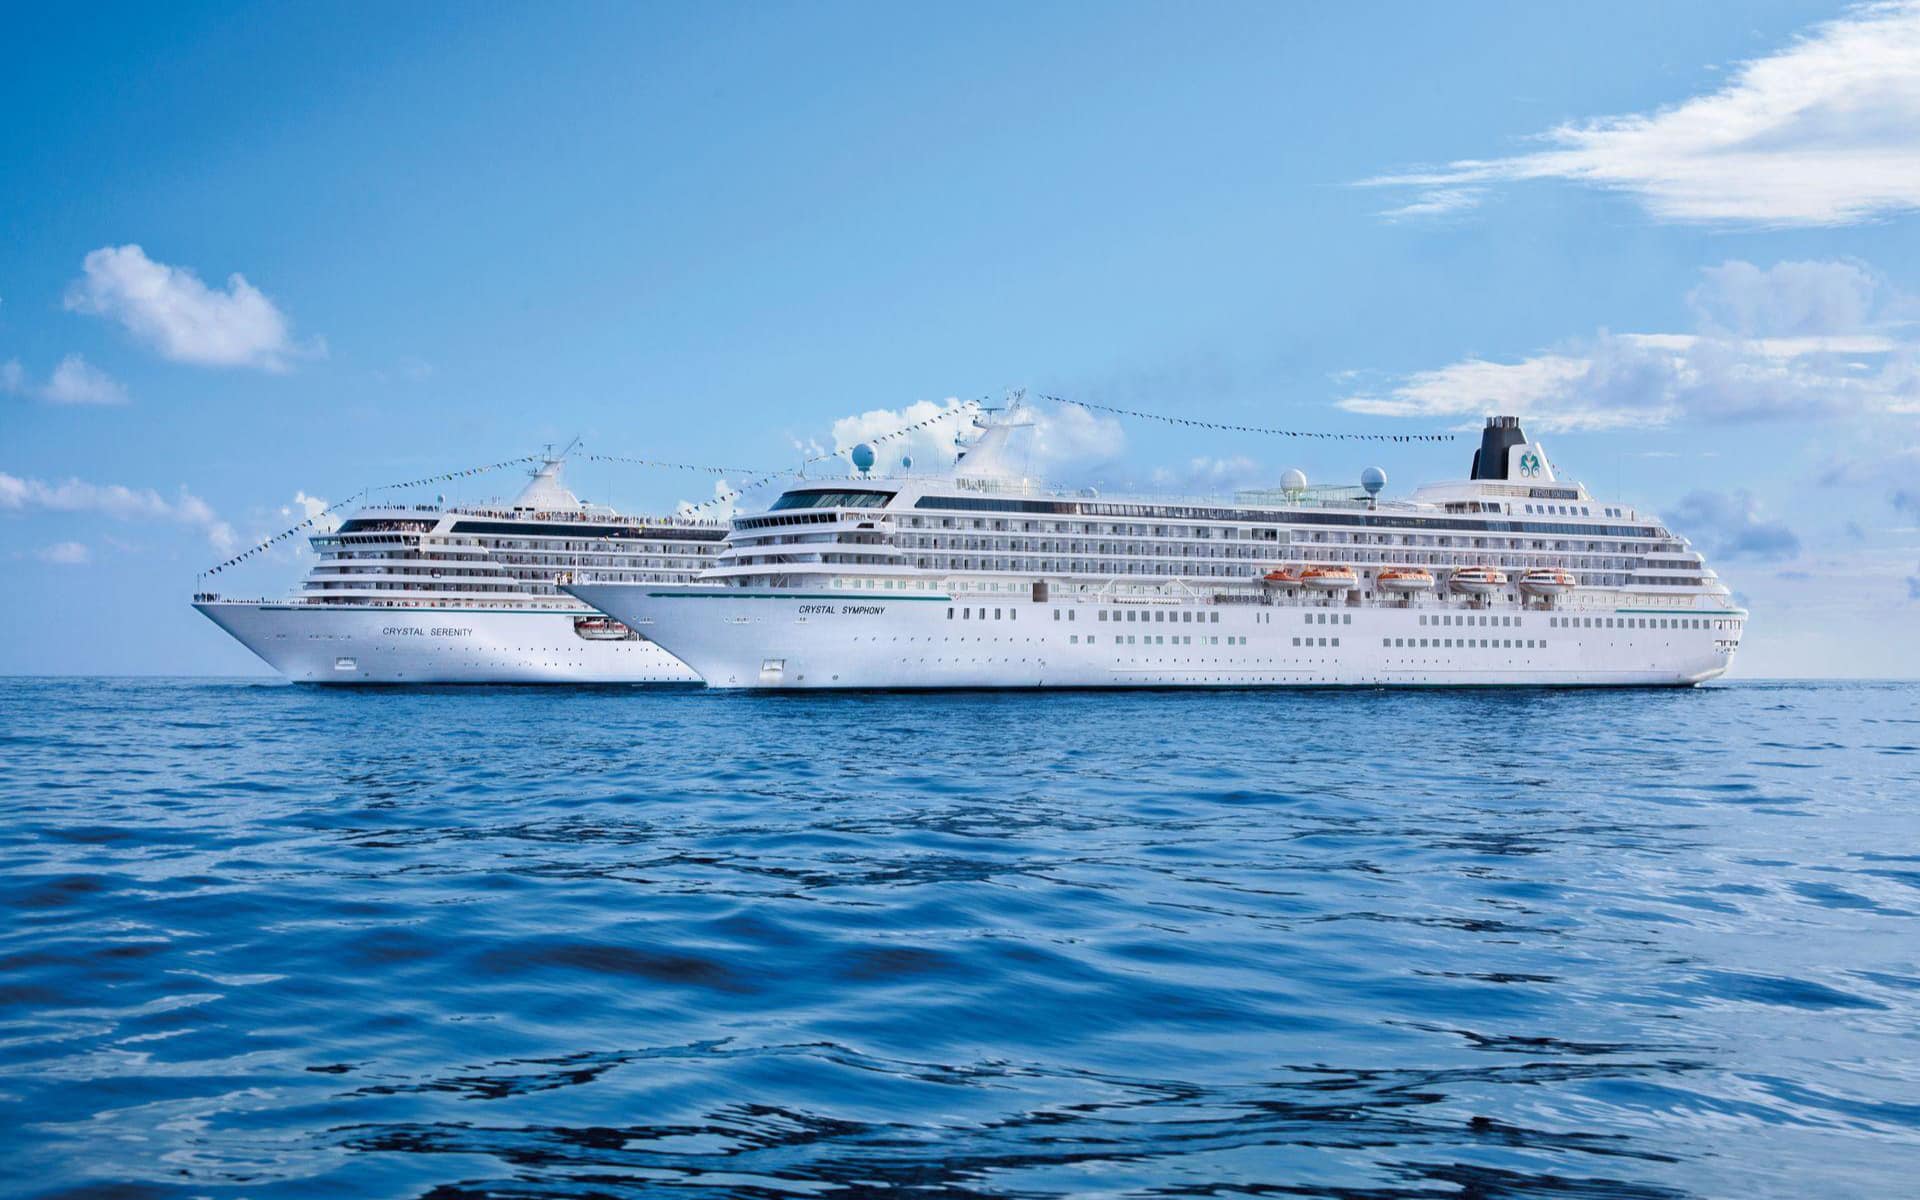 Hotel directors have been announced for the Crystal Cruises ships Crystal Serenity and Crystal Symphony.